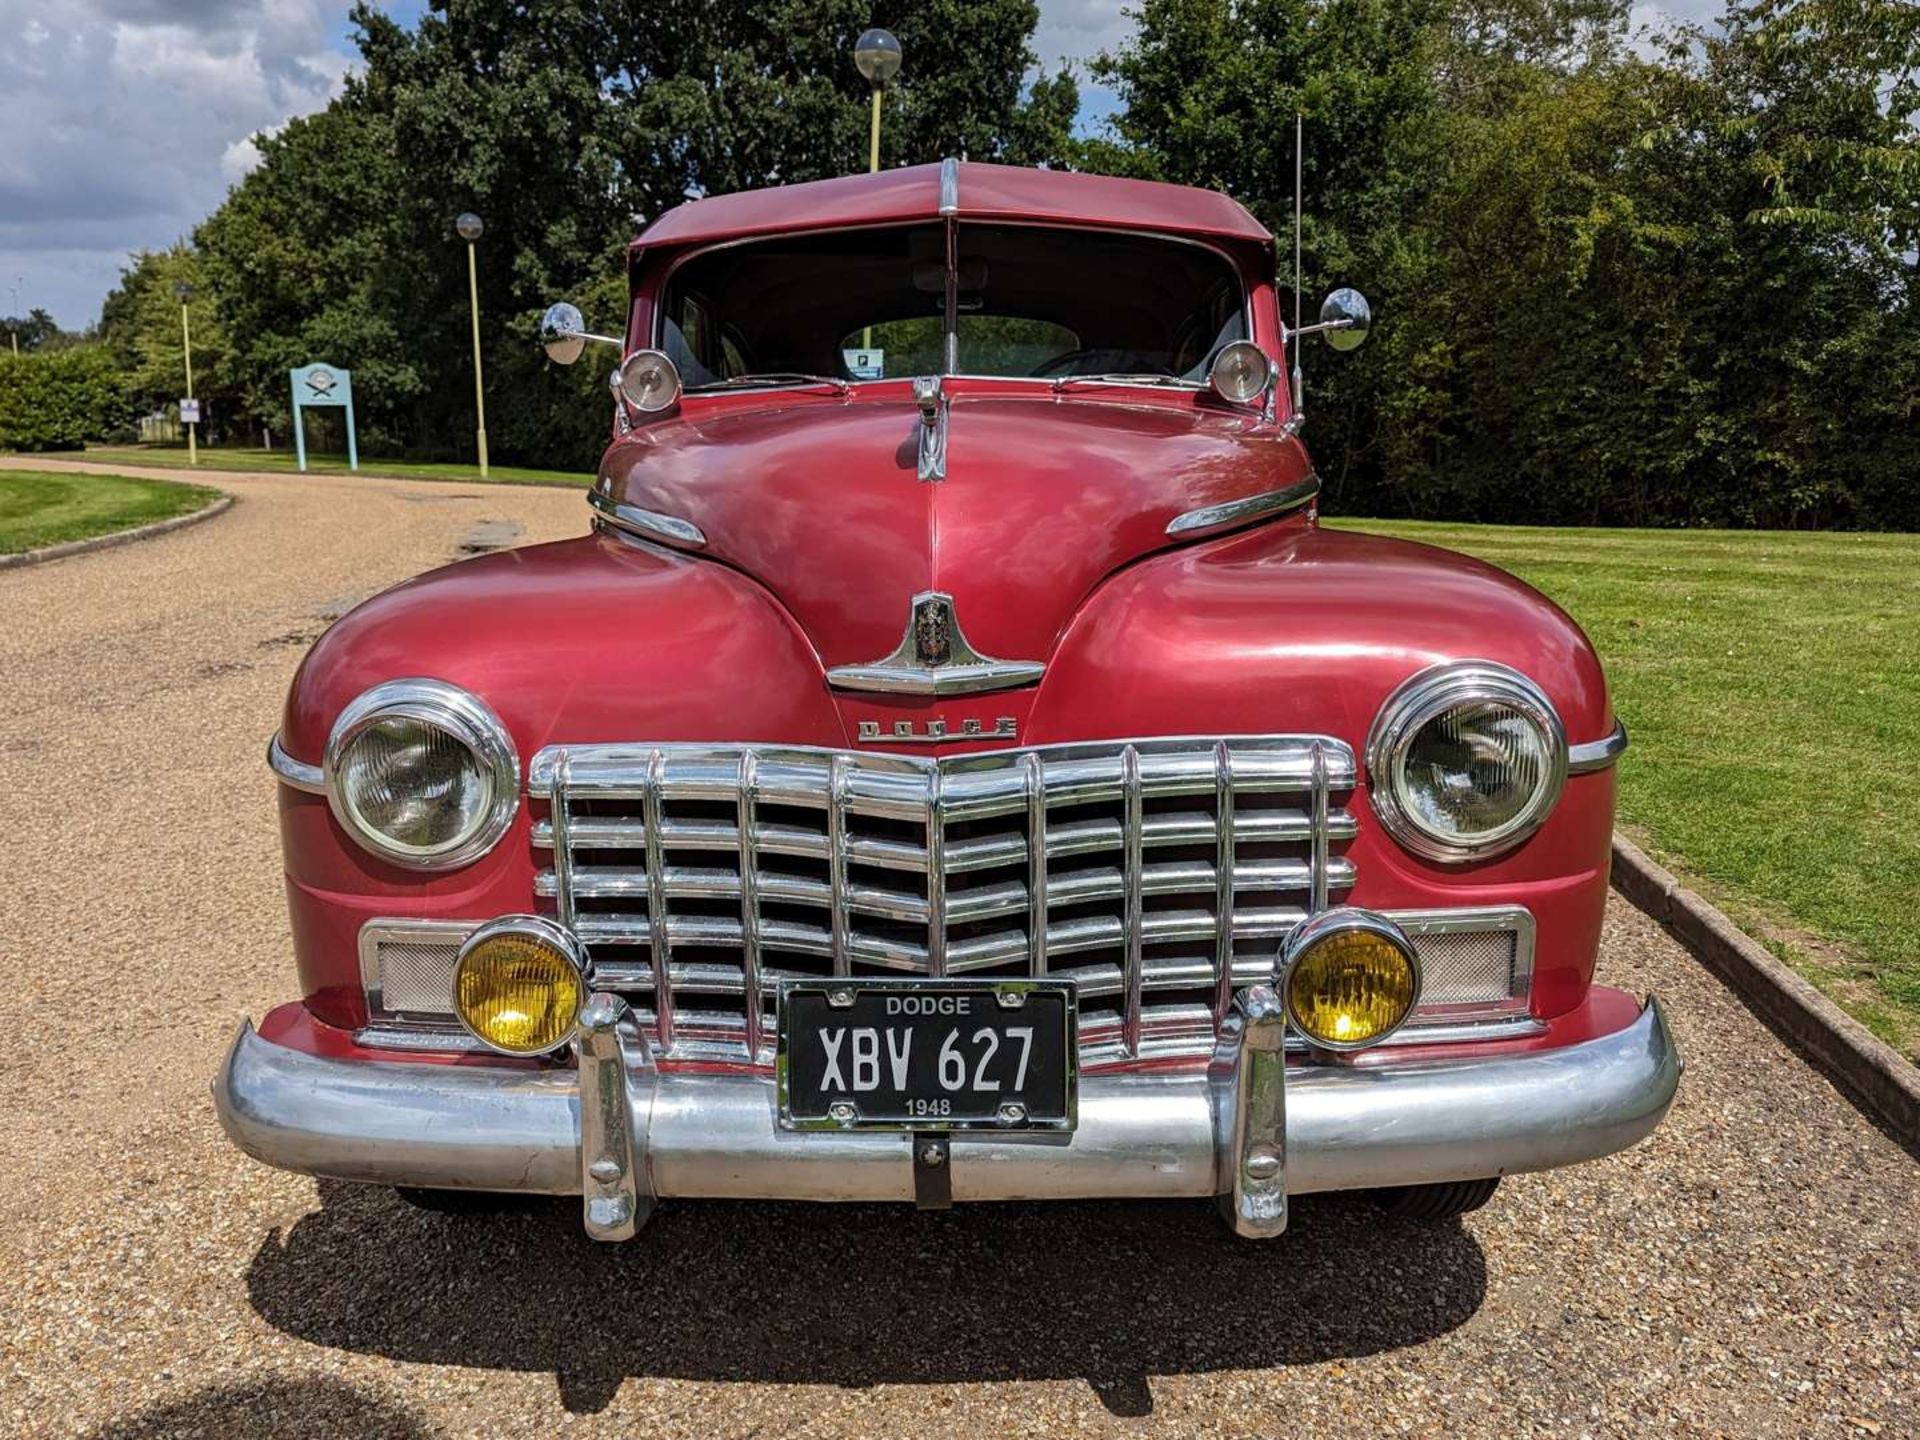 1947 DODGE SPECIAL DELUXE LHD - Image 2 of 30